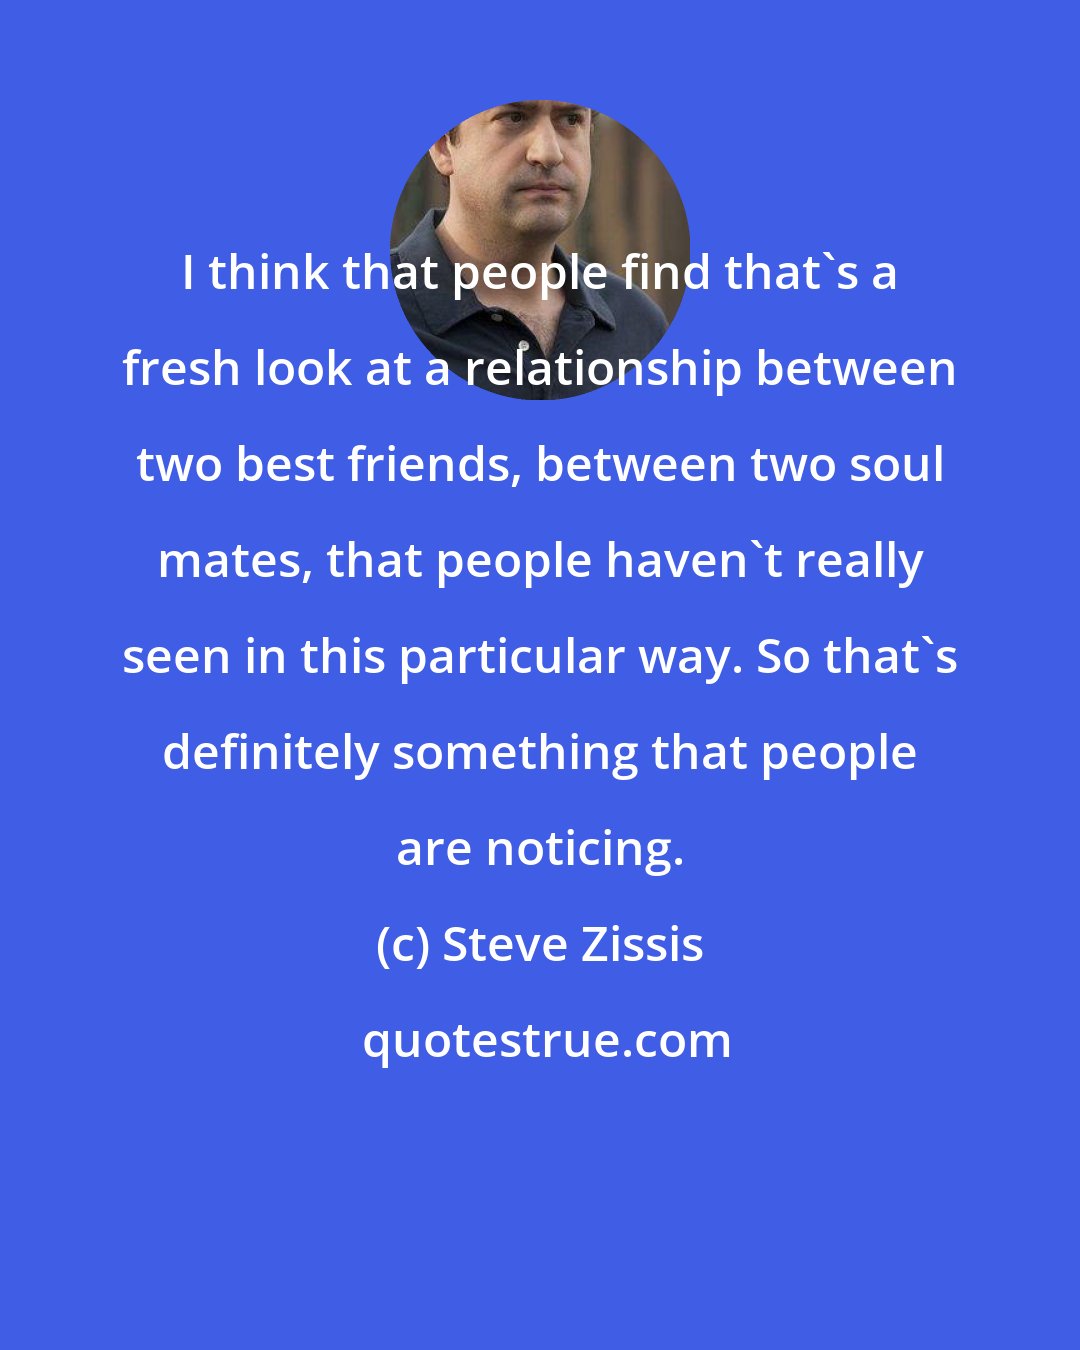 Steve Zissis: I think that people find that's a fresh look at a relationship between two best friends, between two soul mates, that people haven't really seen in this particular way. So that's definitely something that people are noticing.